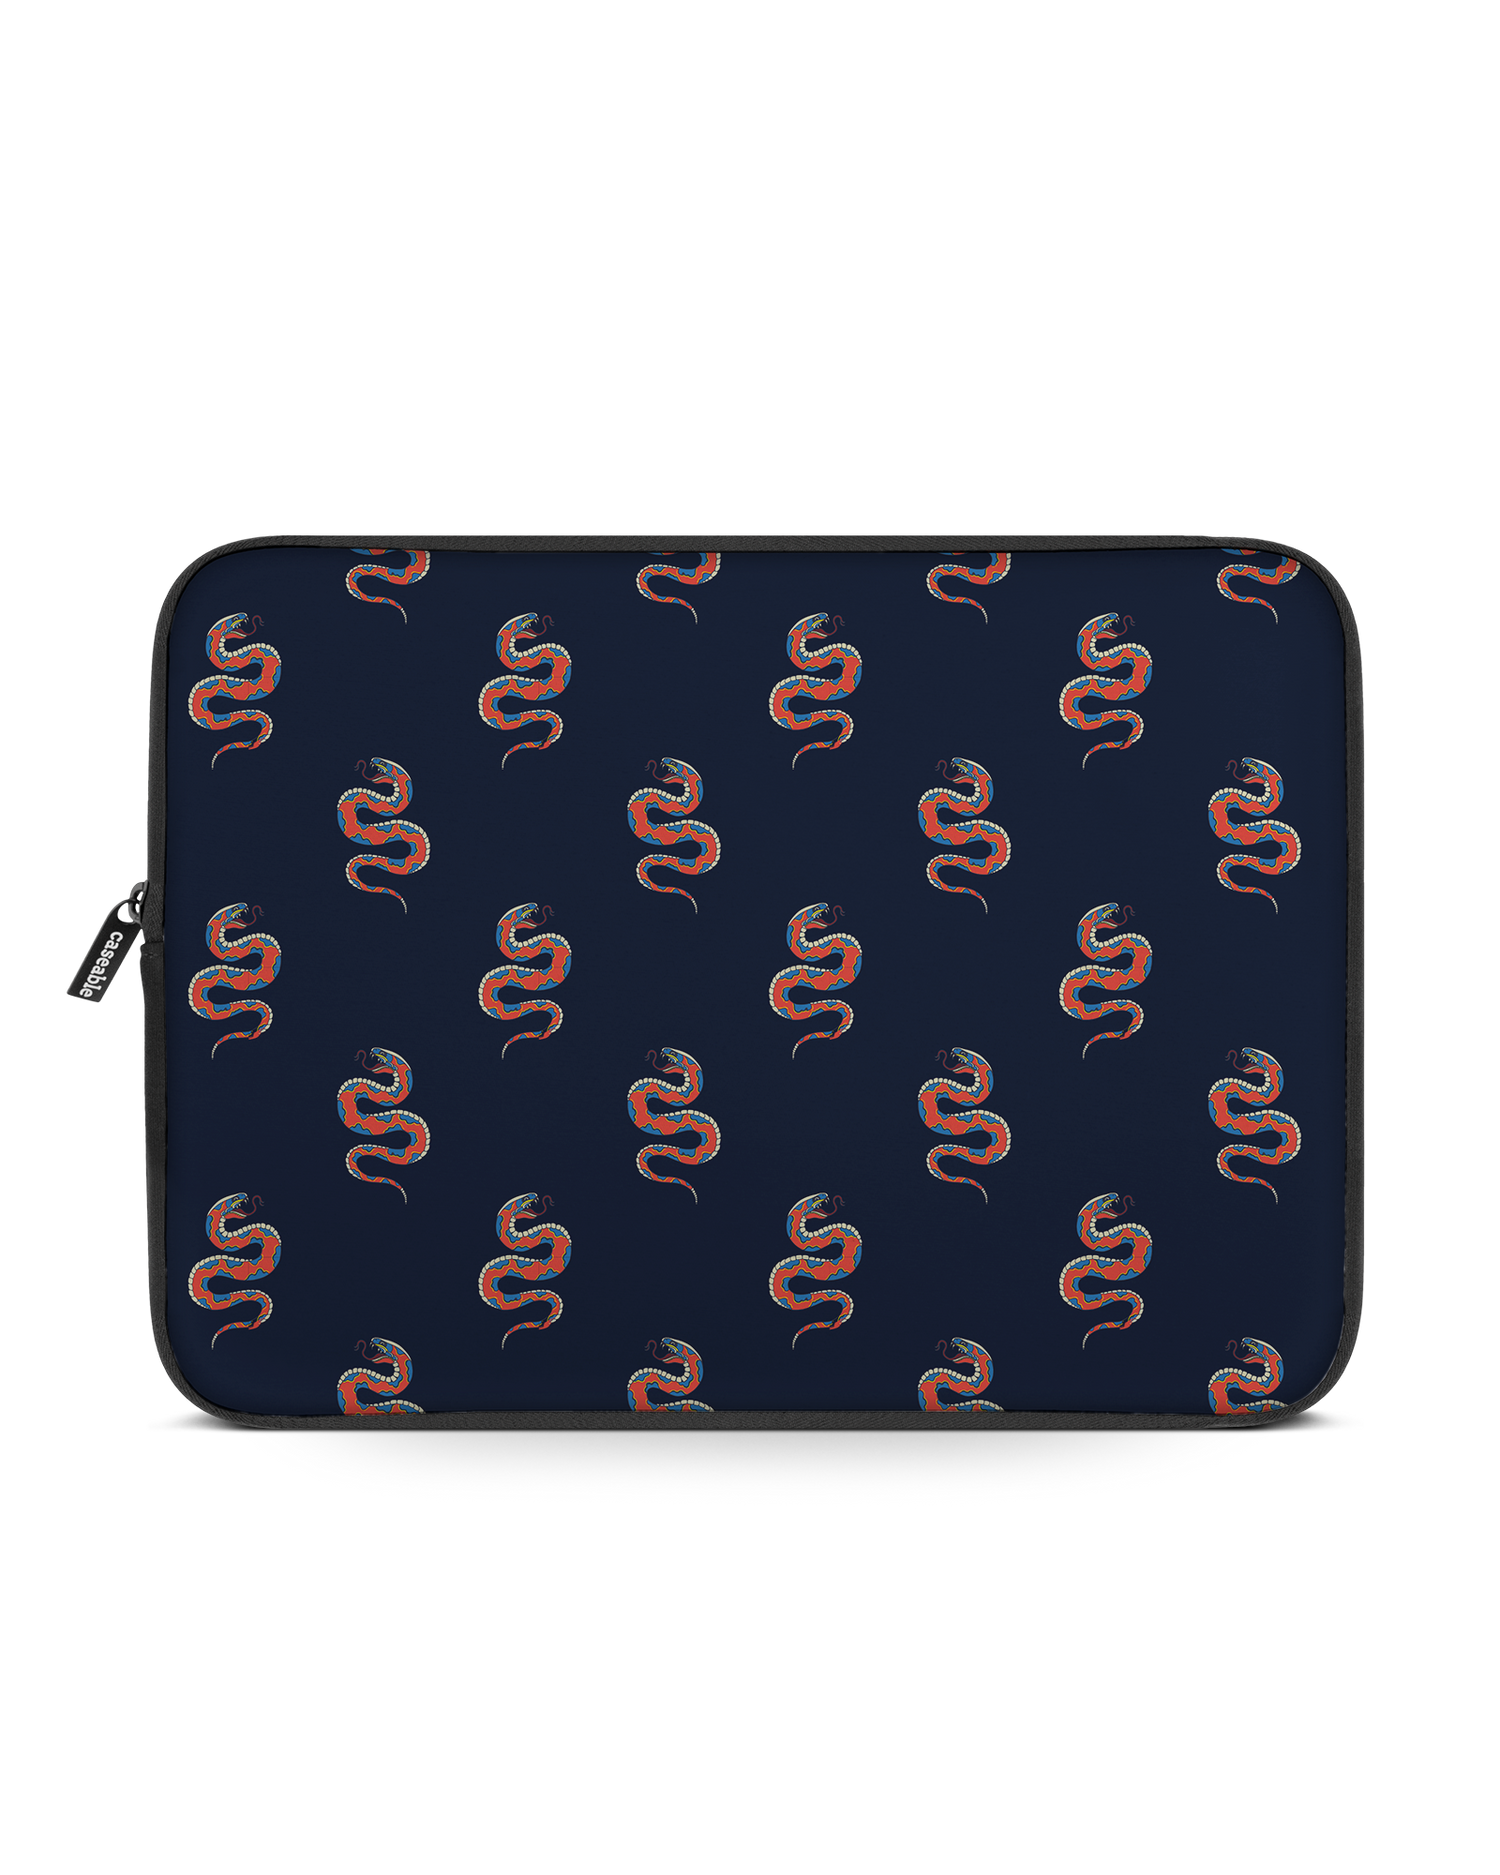 Repeating Snakes Laptop Case 15 inch: Front View